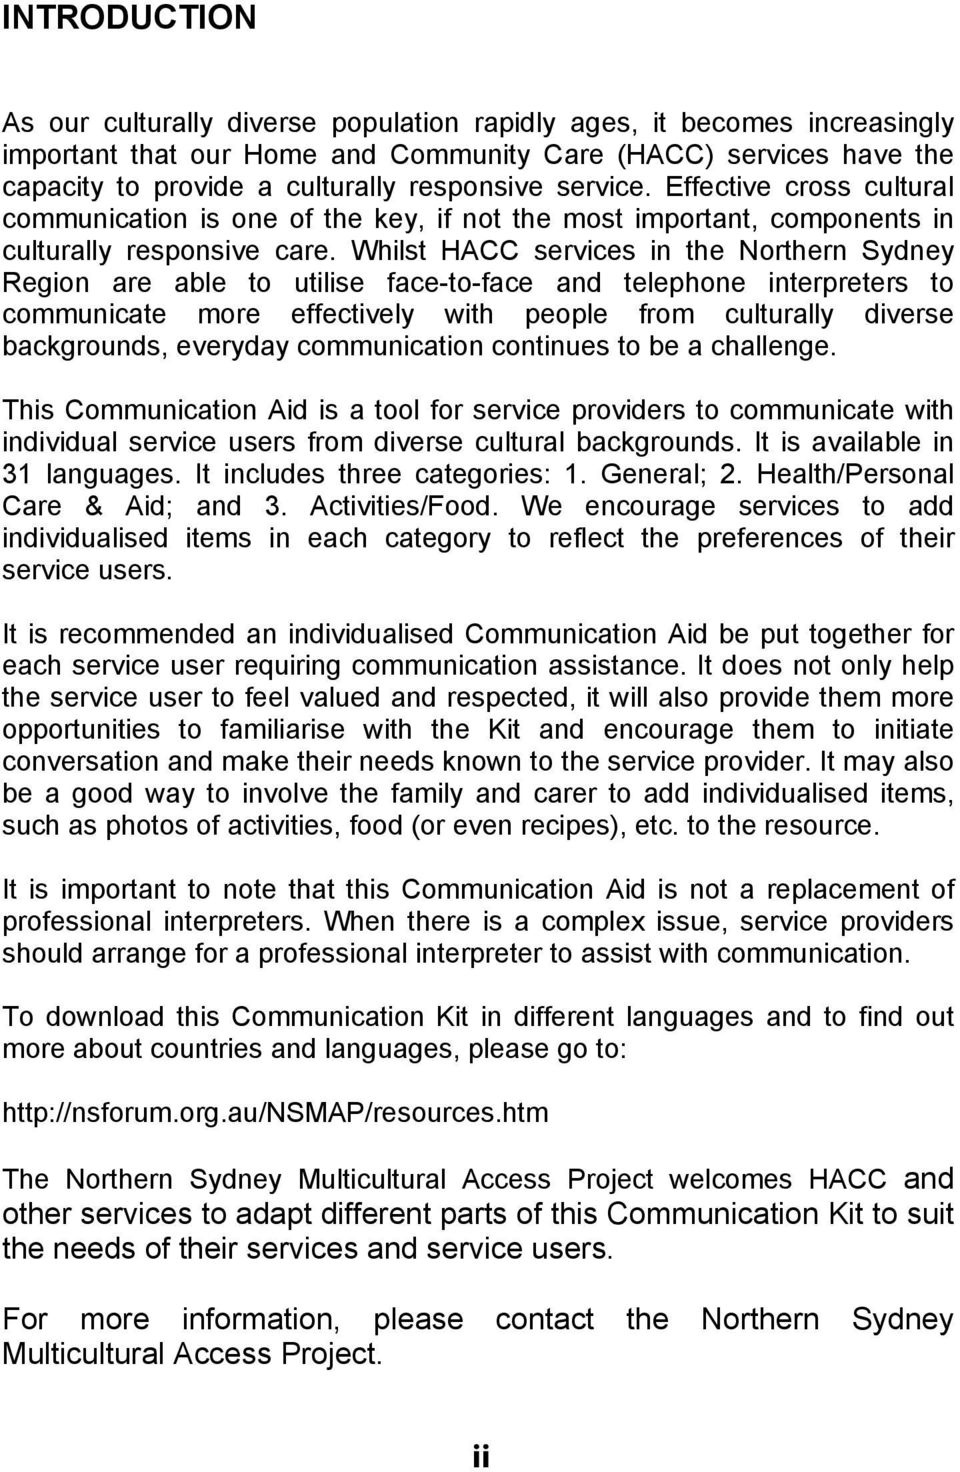 Whilst HACC services in the Northern Sydney Region are able to utilise face-to-face and telephone interpreters to communicate more effectively with people from culturally diverse backgrounds,